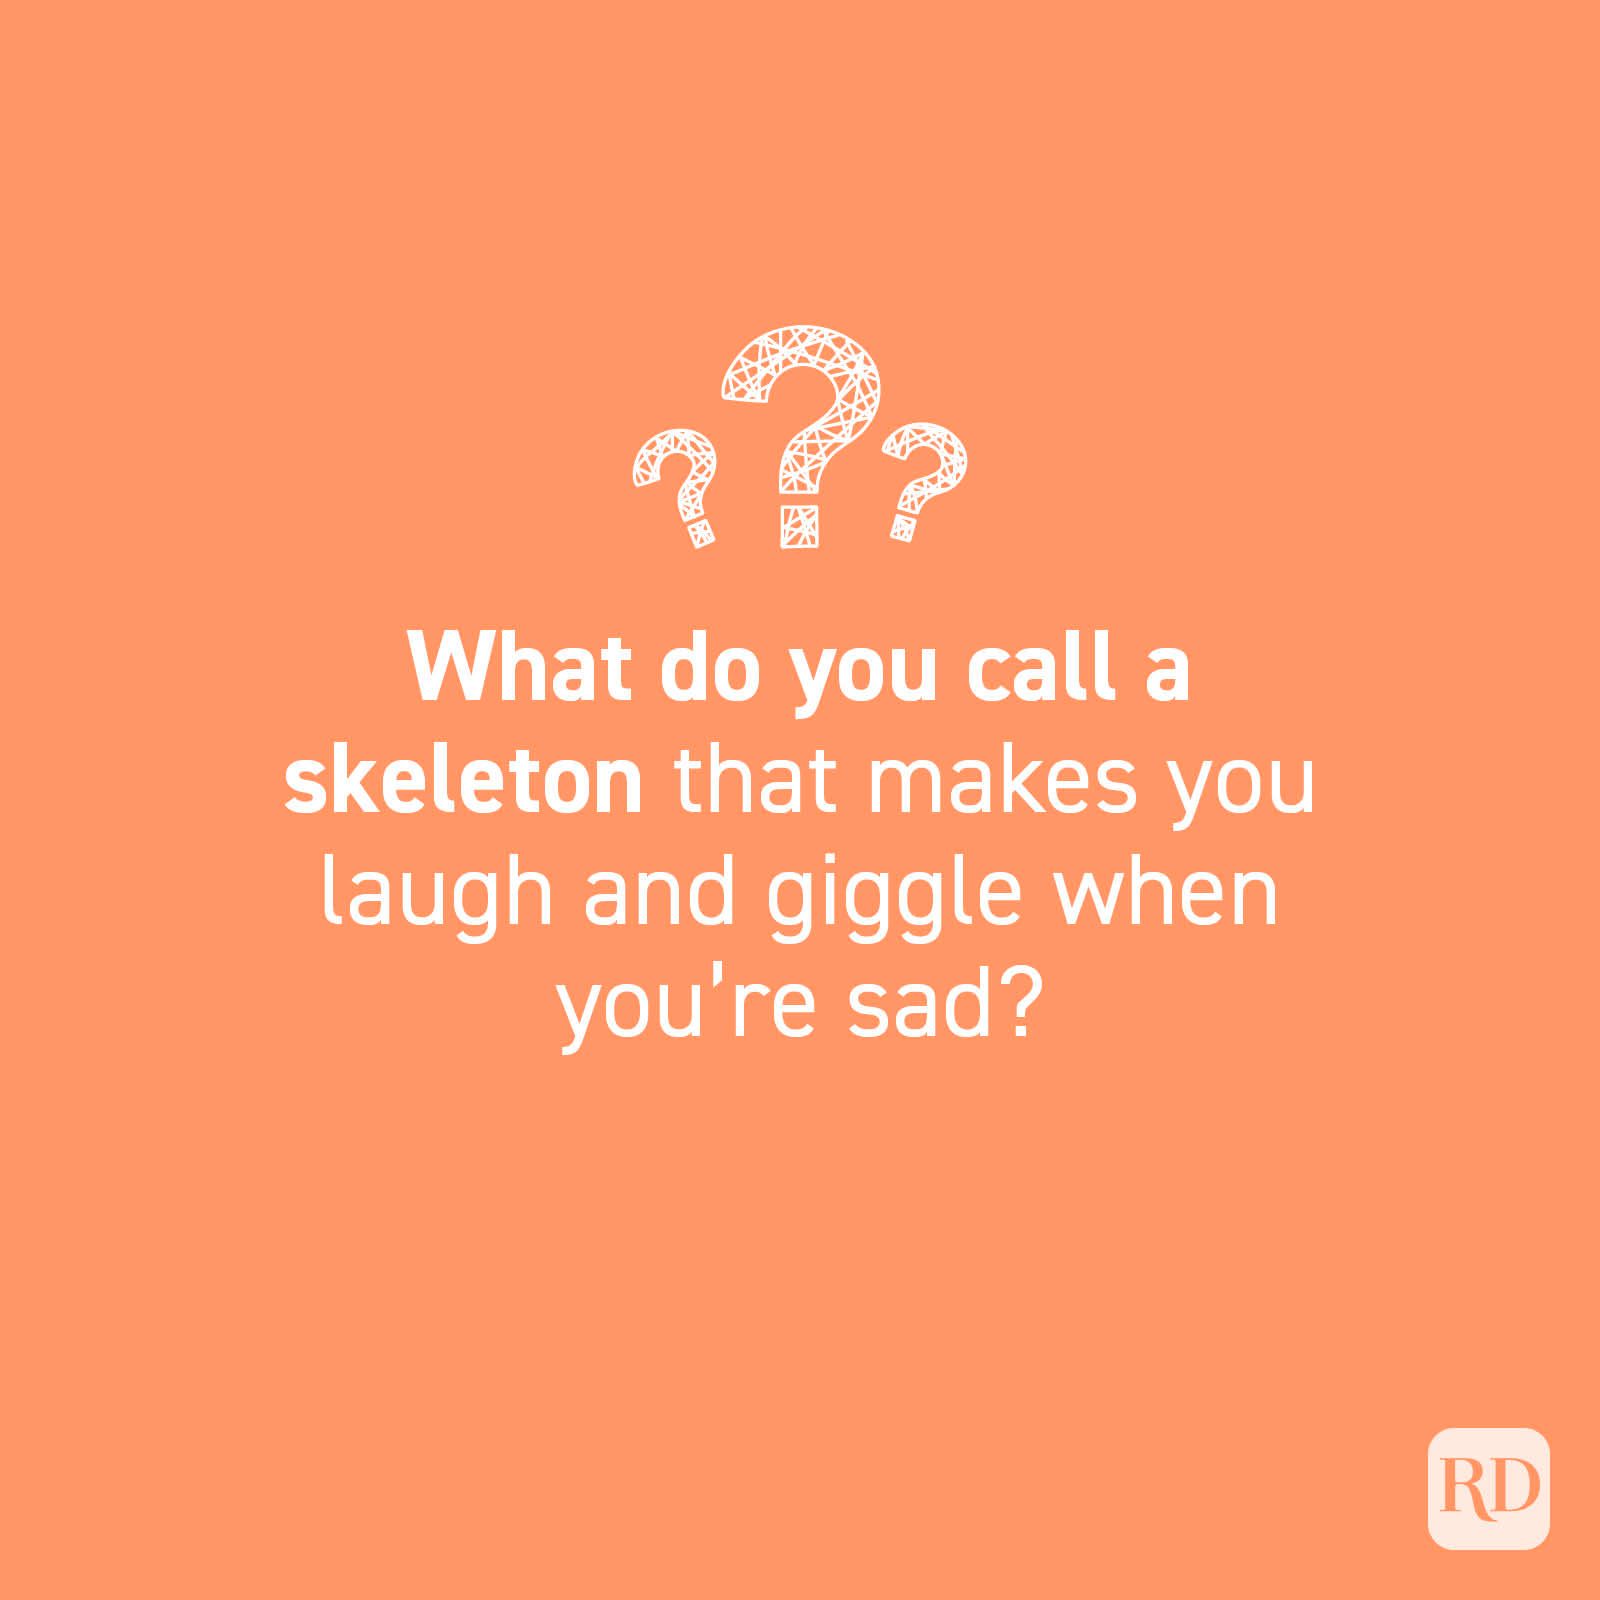 Scary Good Halloween Riddles for All Ages | Reader's Digest